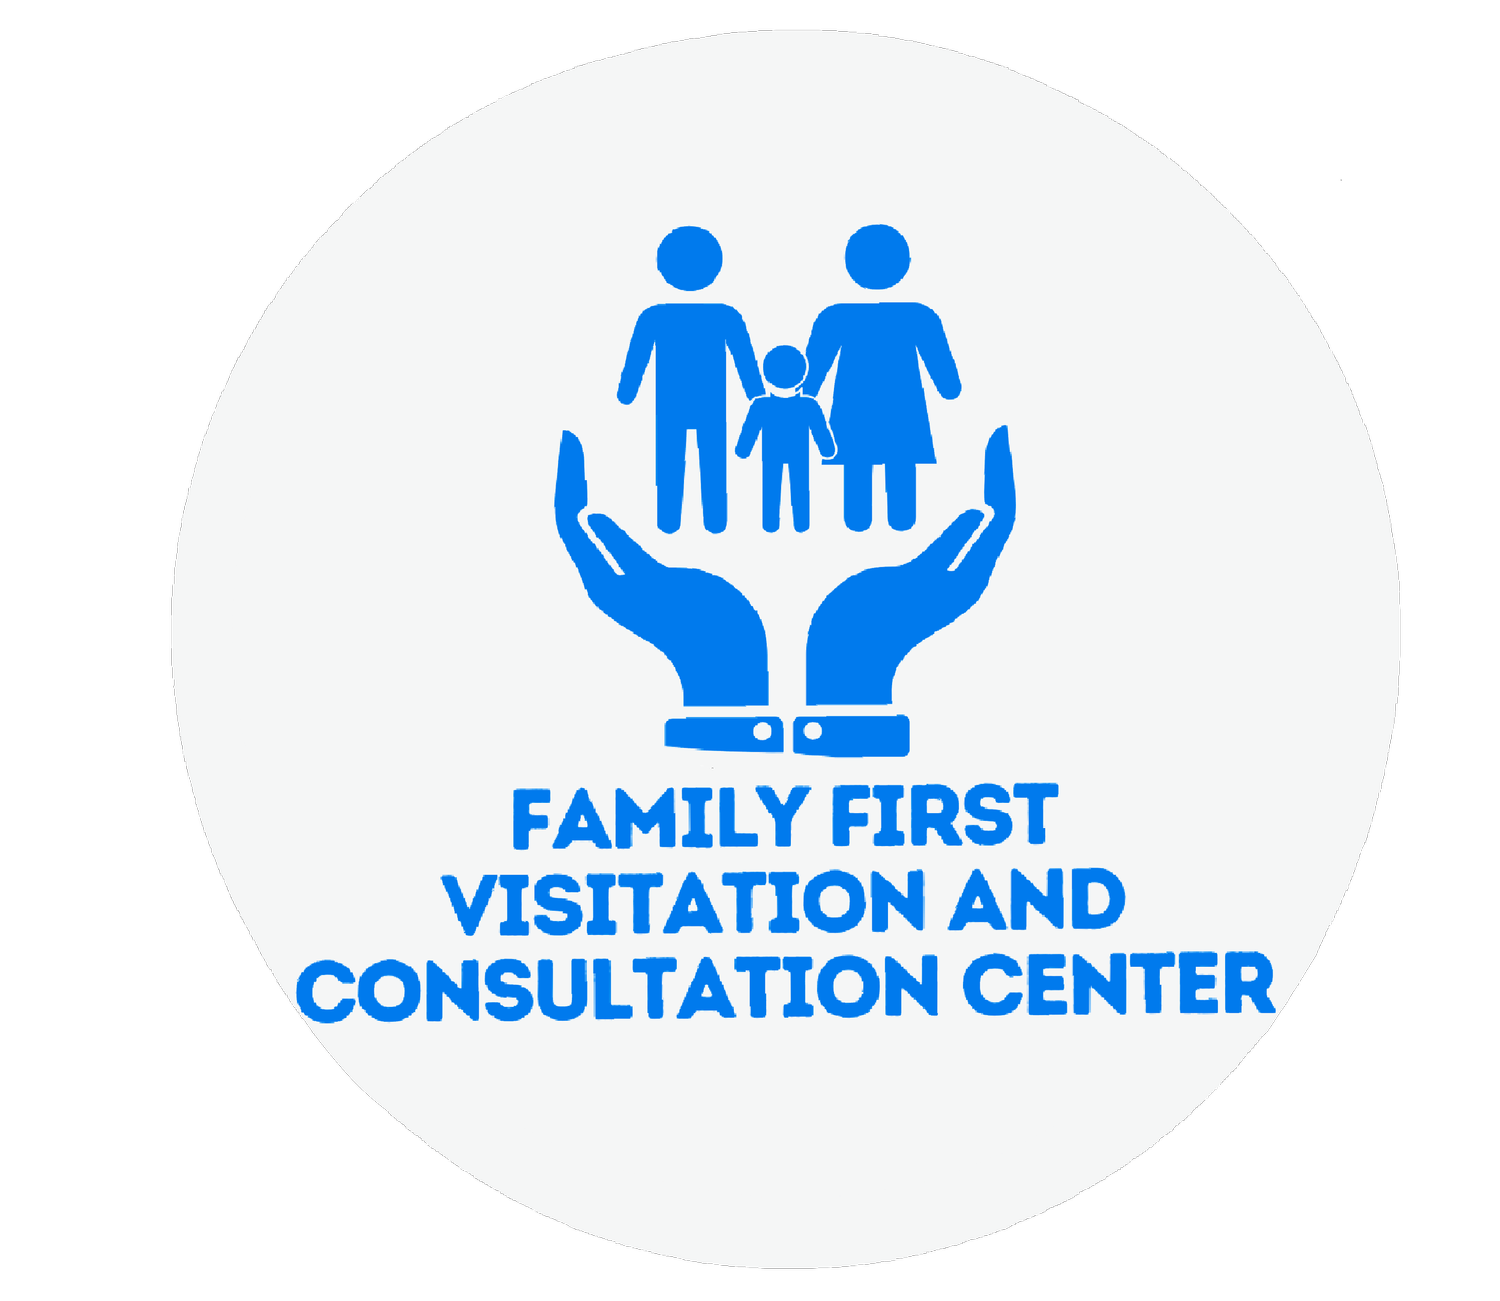 Family First Visitation and Consultation Center